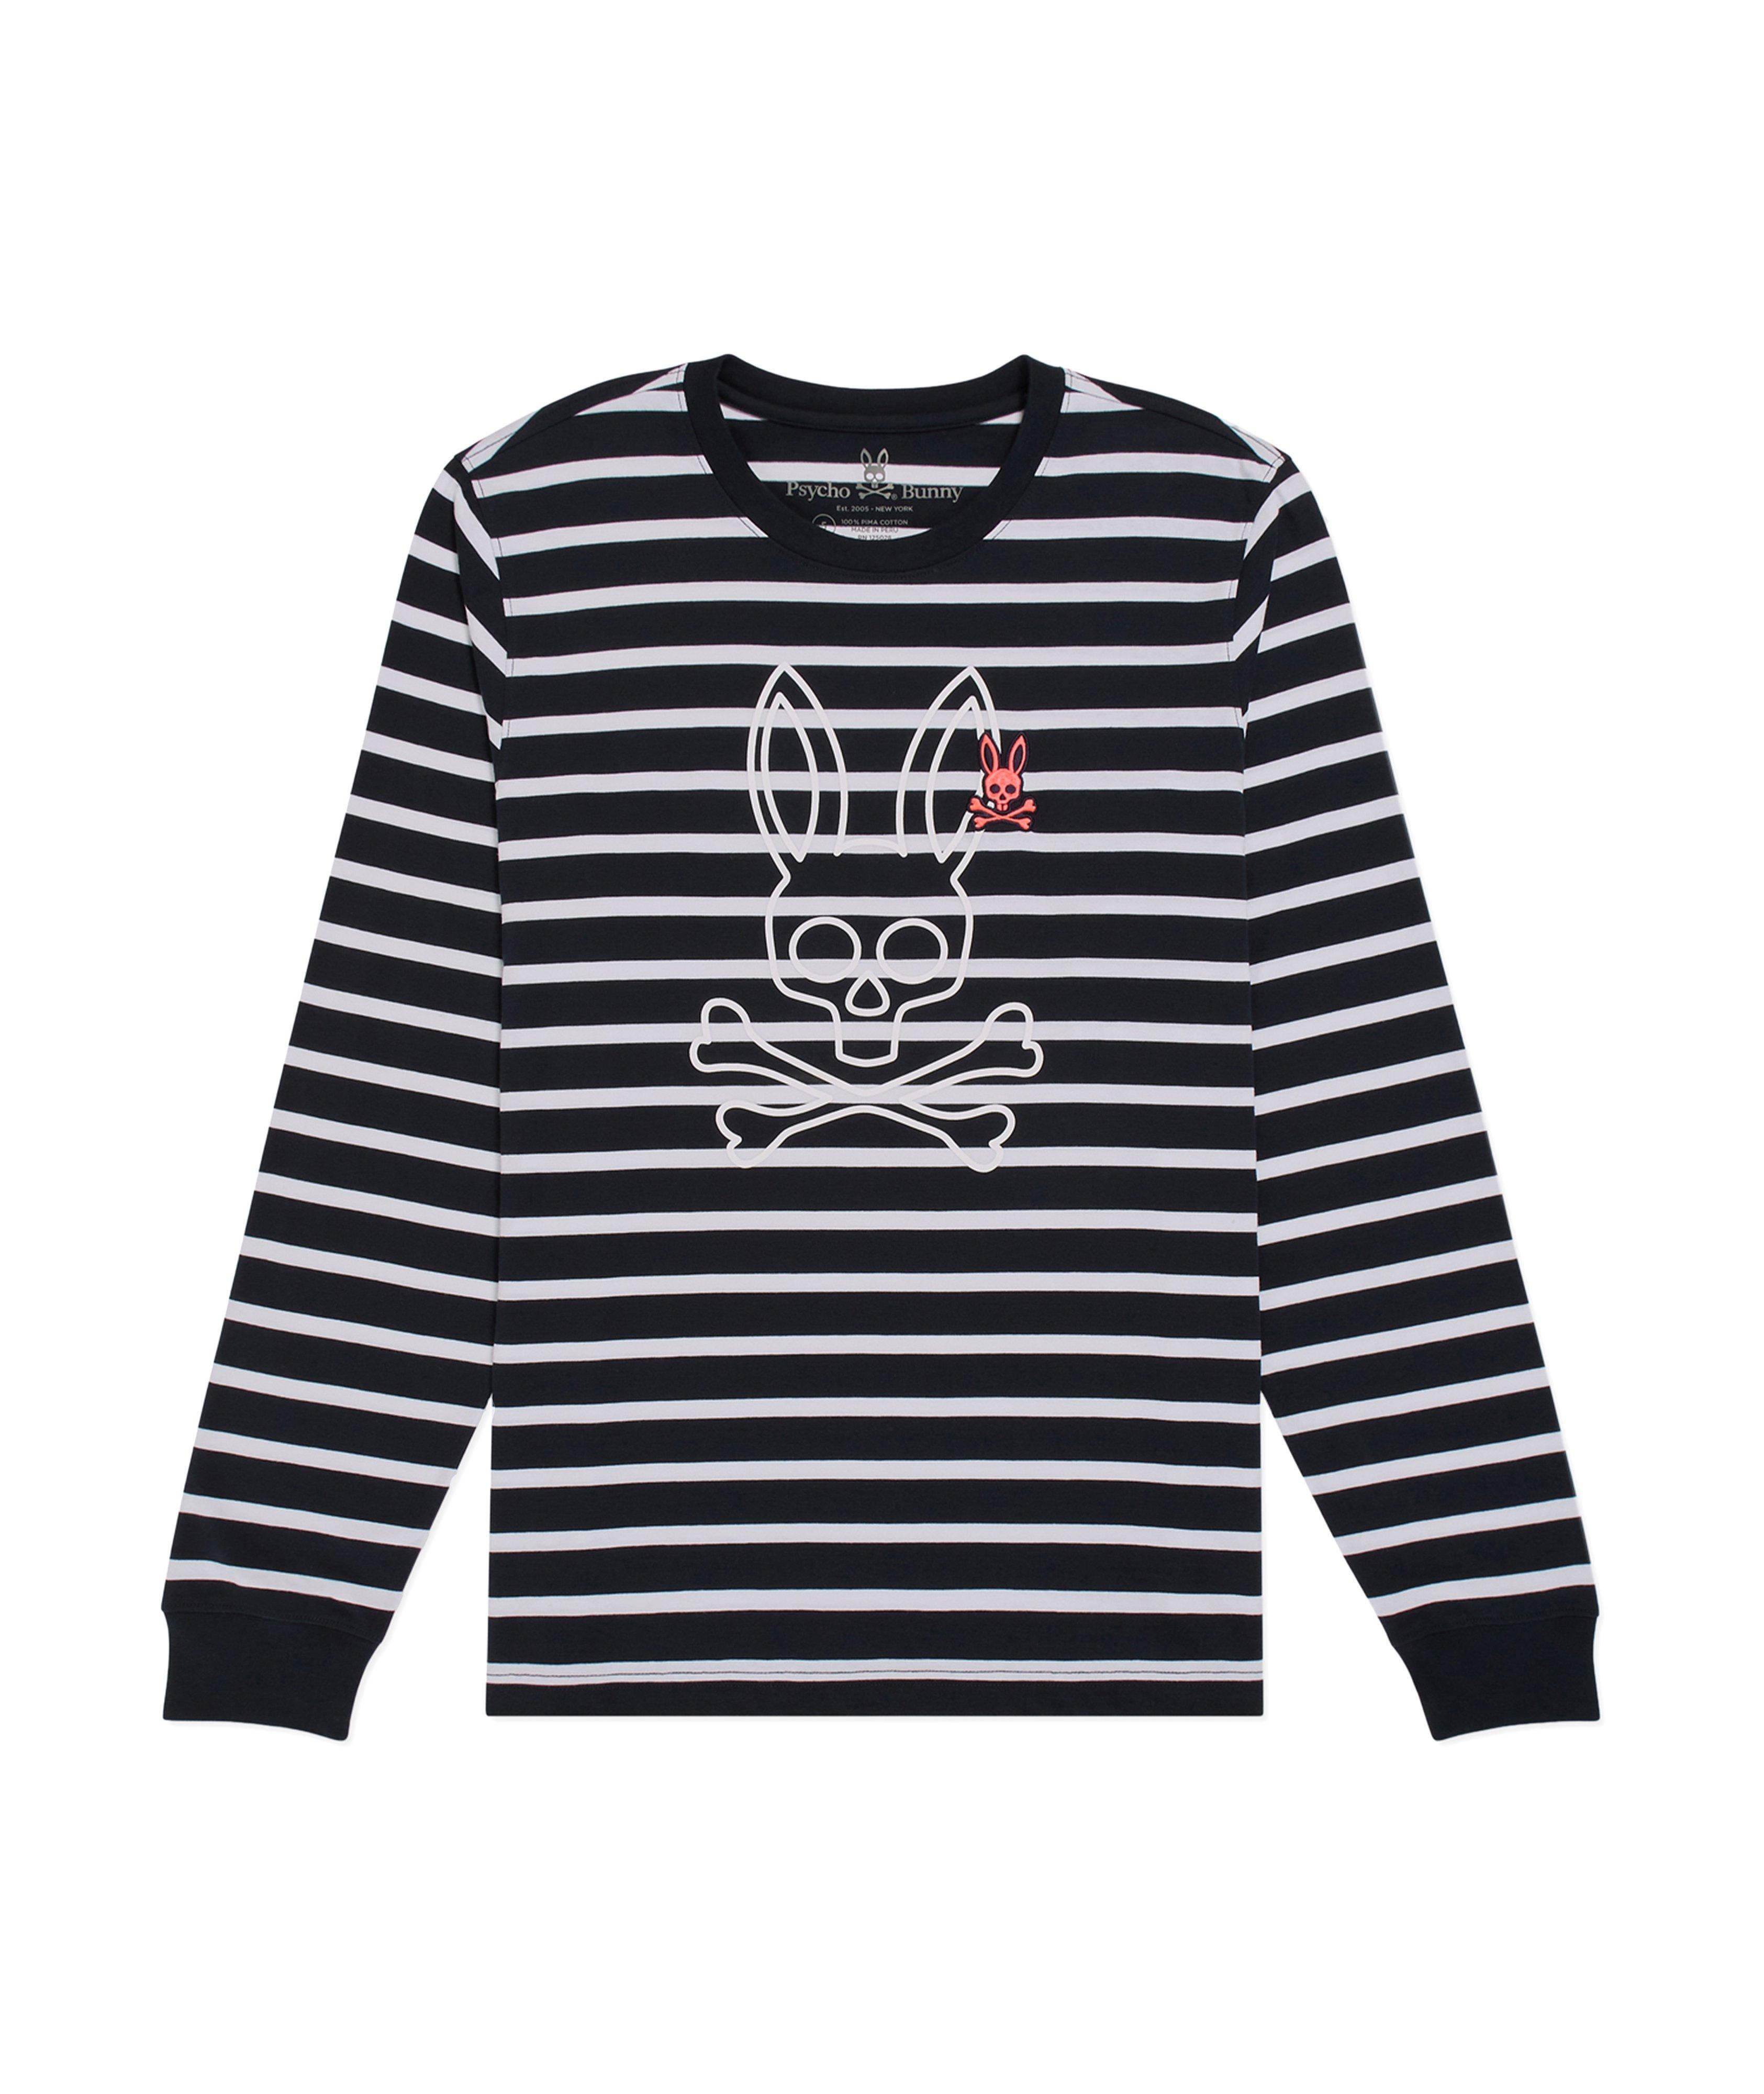 Parkhouse Stripped Long-sleeve T-shirt image 0